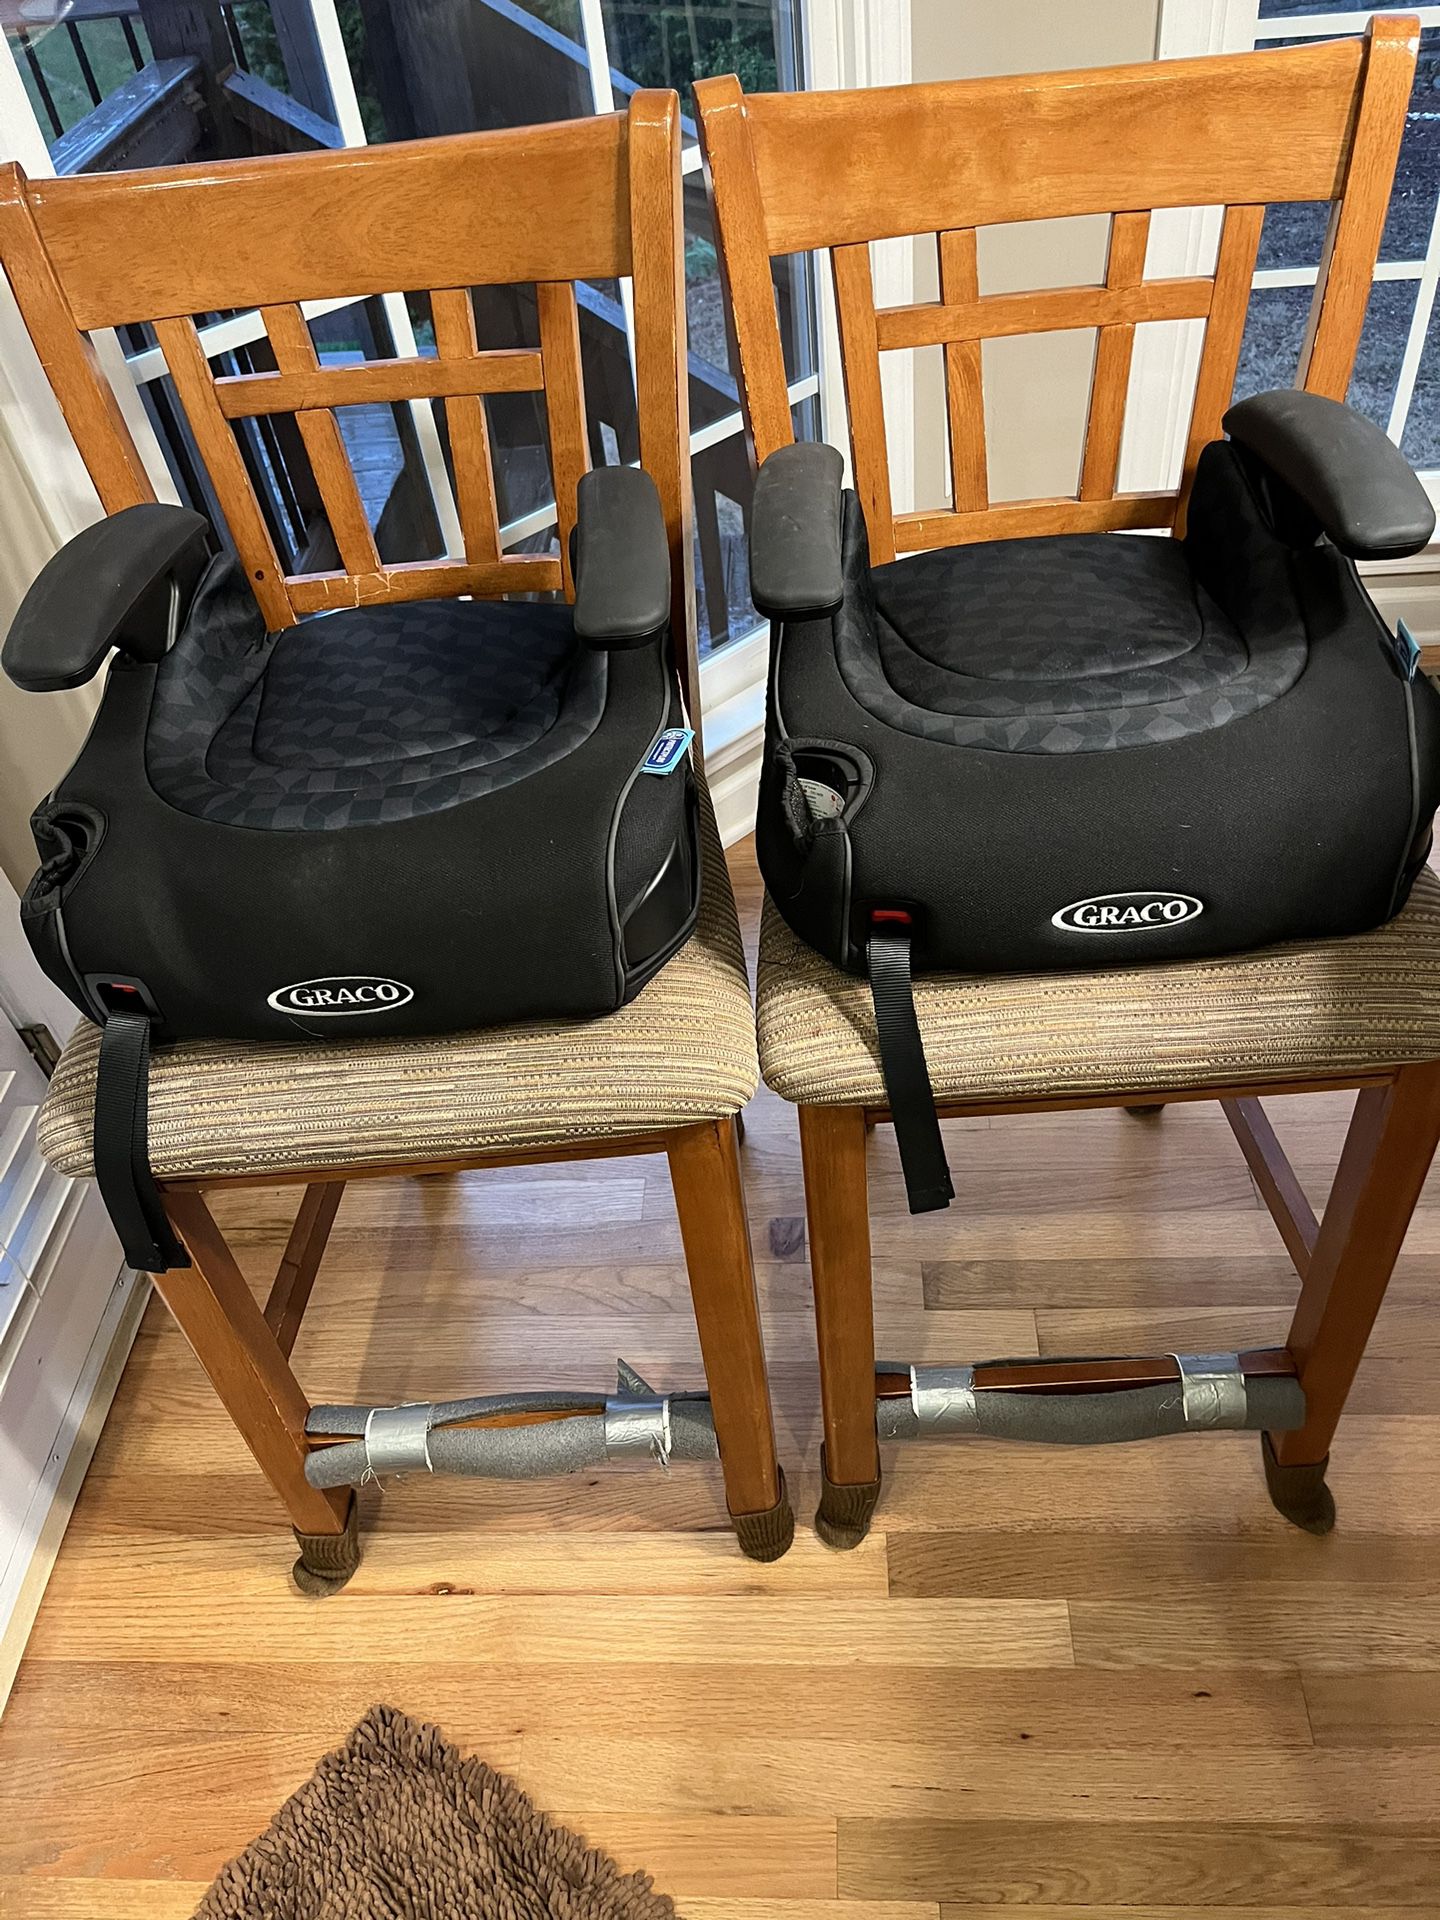 Graco Car Booster Seat Turbo LX $15 each